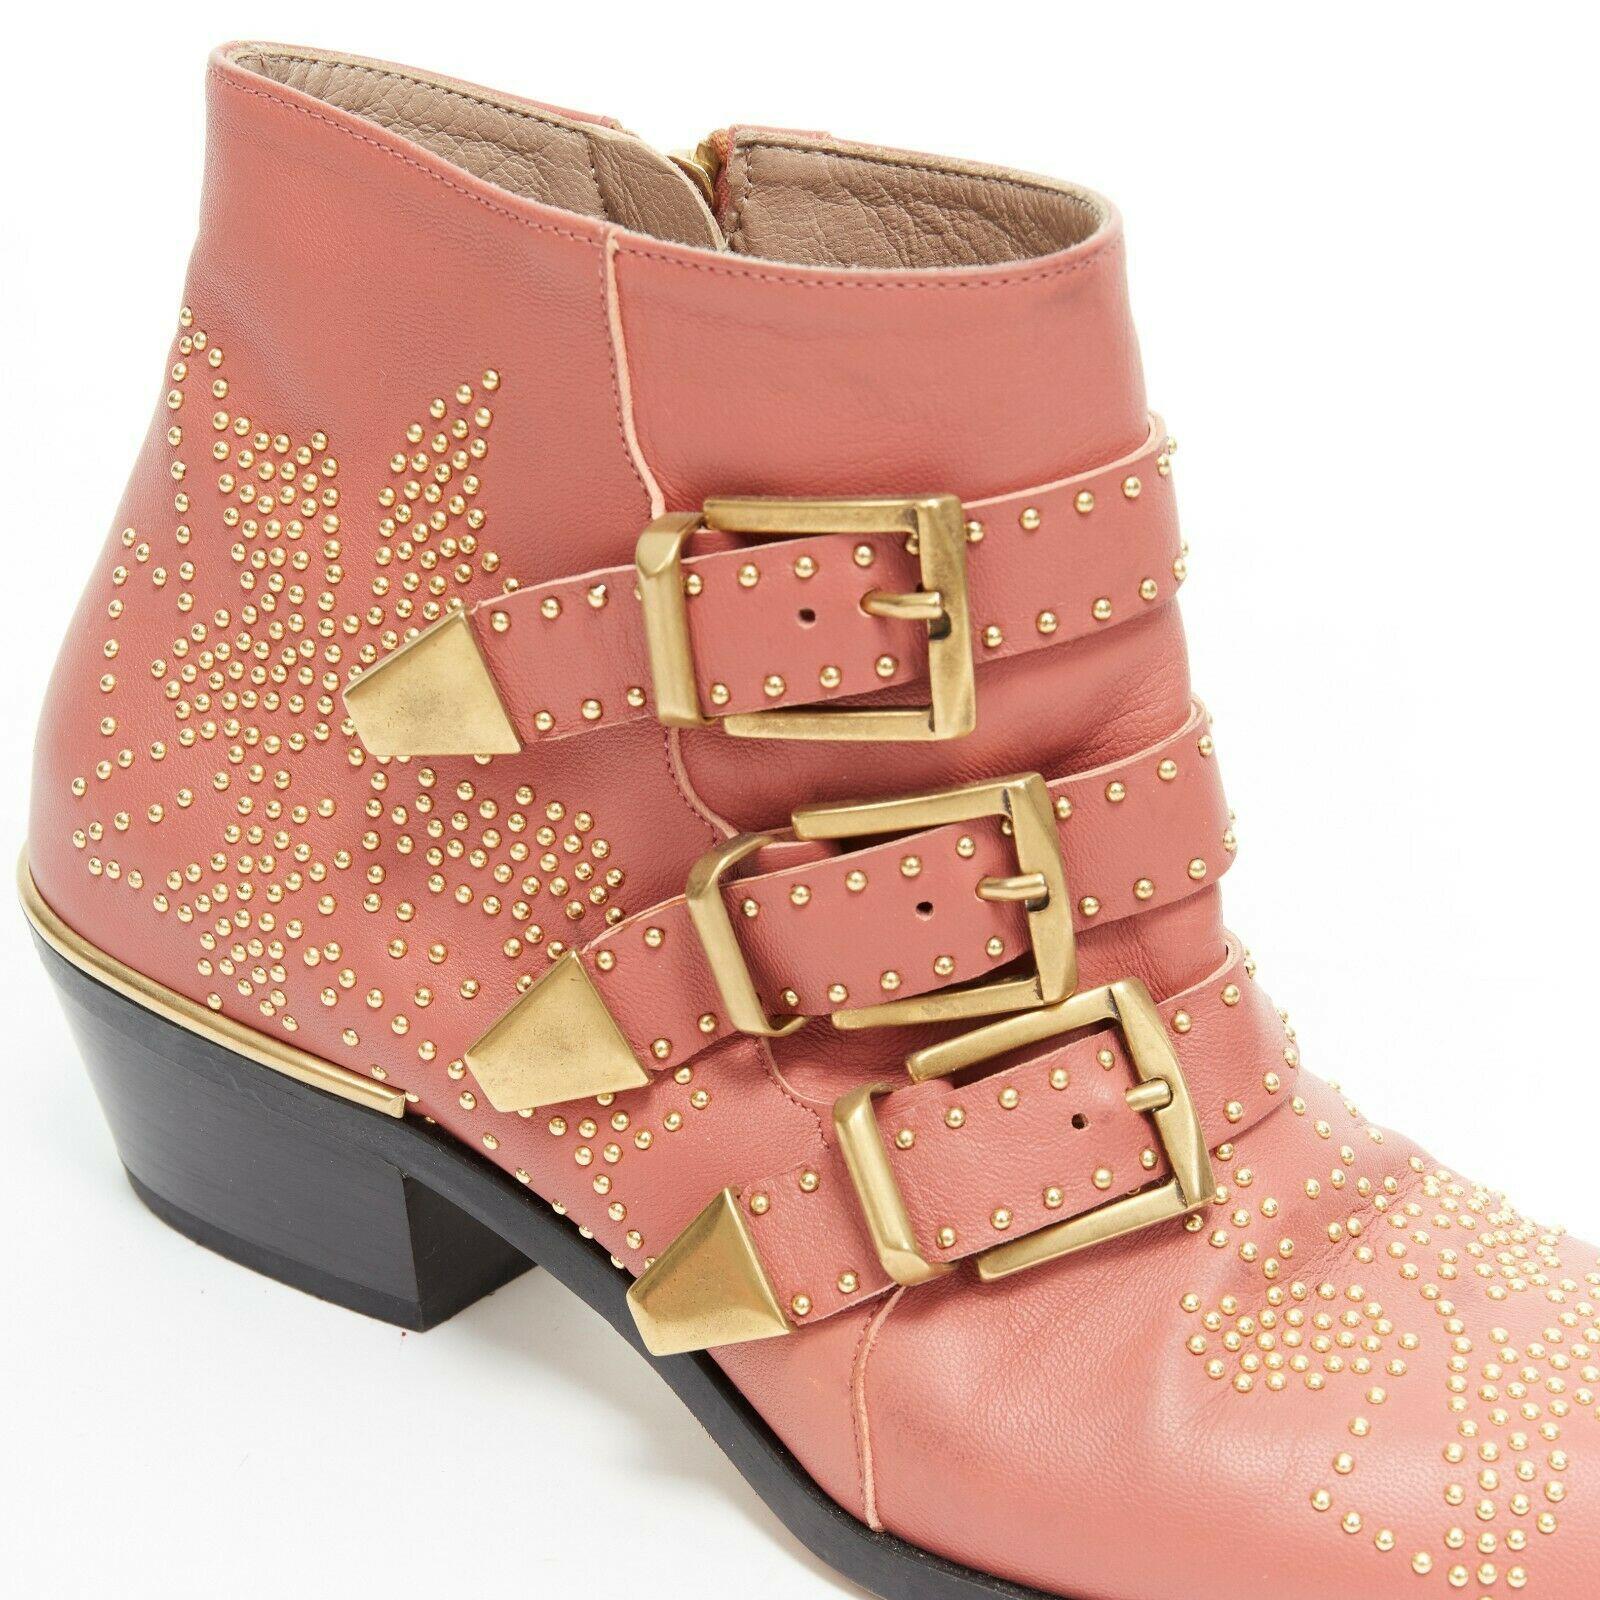 CHLOE Susanna dusty rose pink gold floral micro stud trio buckle ankle boot EU37 2